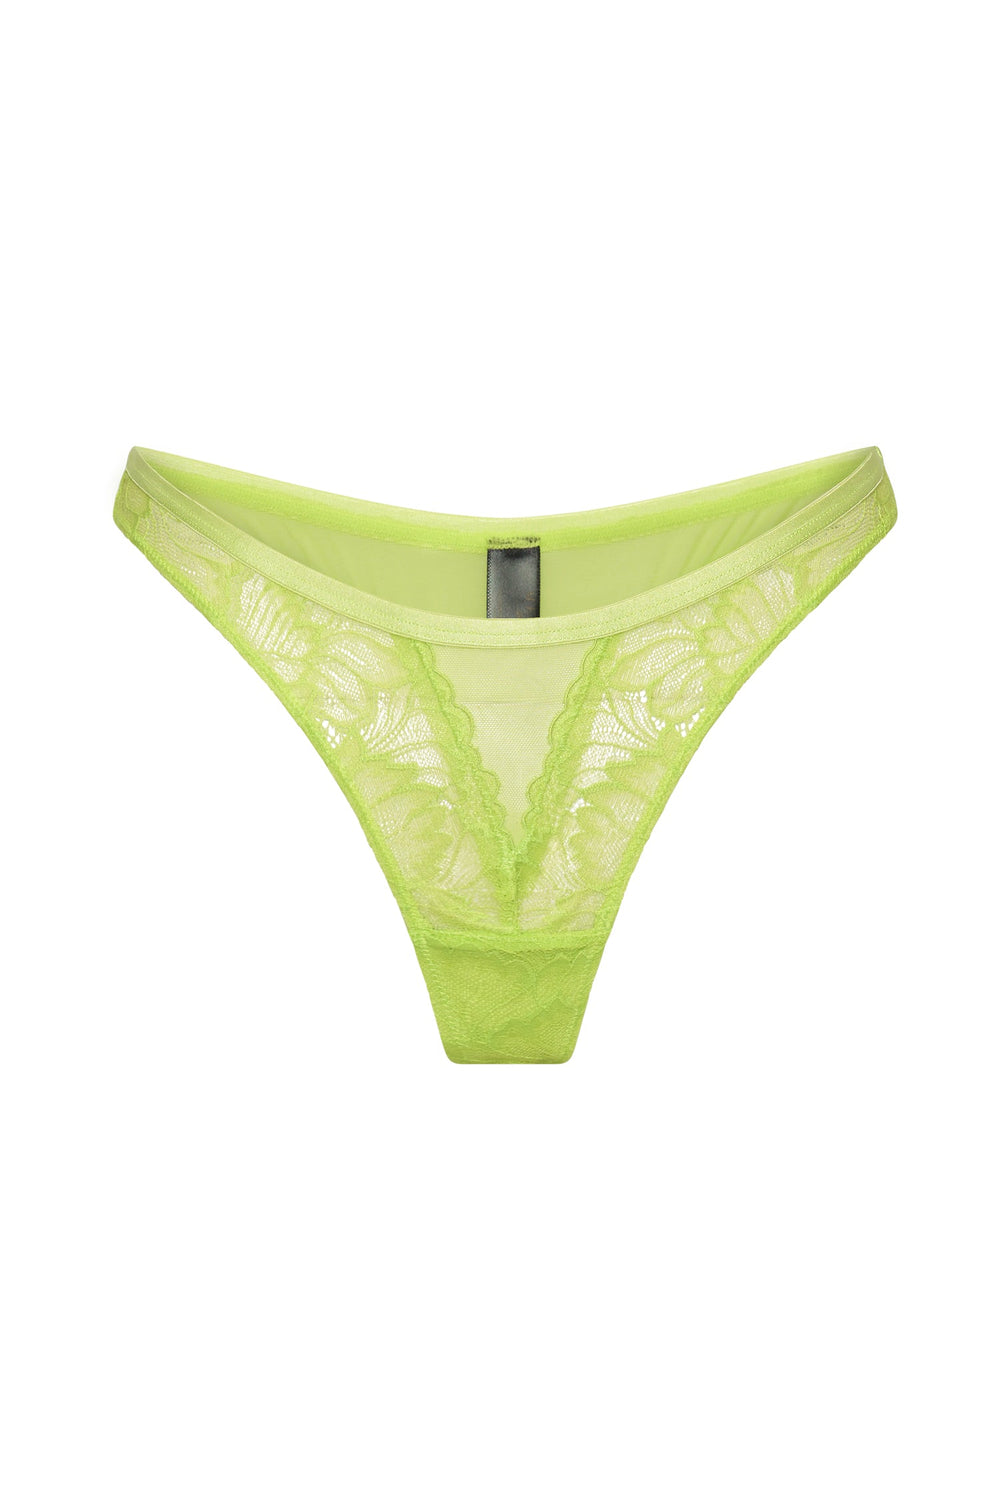 Milana Lace Cheeky Cut Bottoms - Lime Green